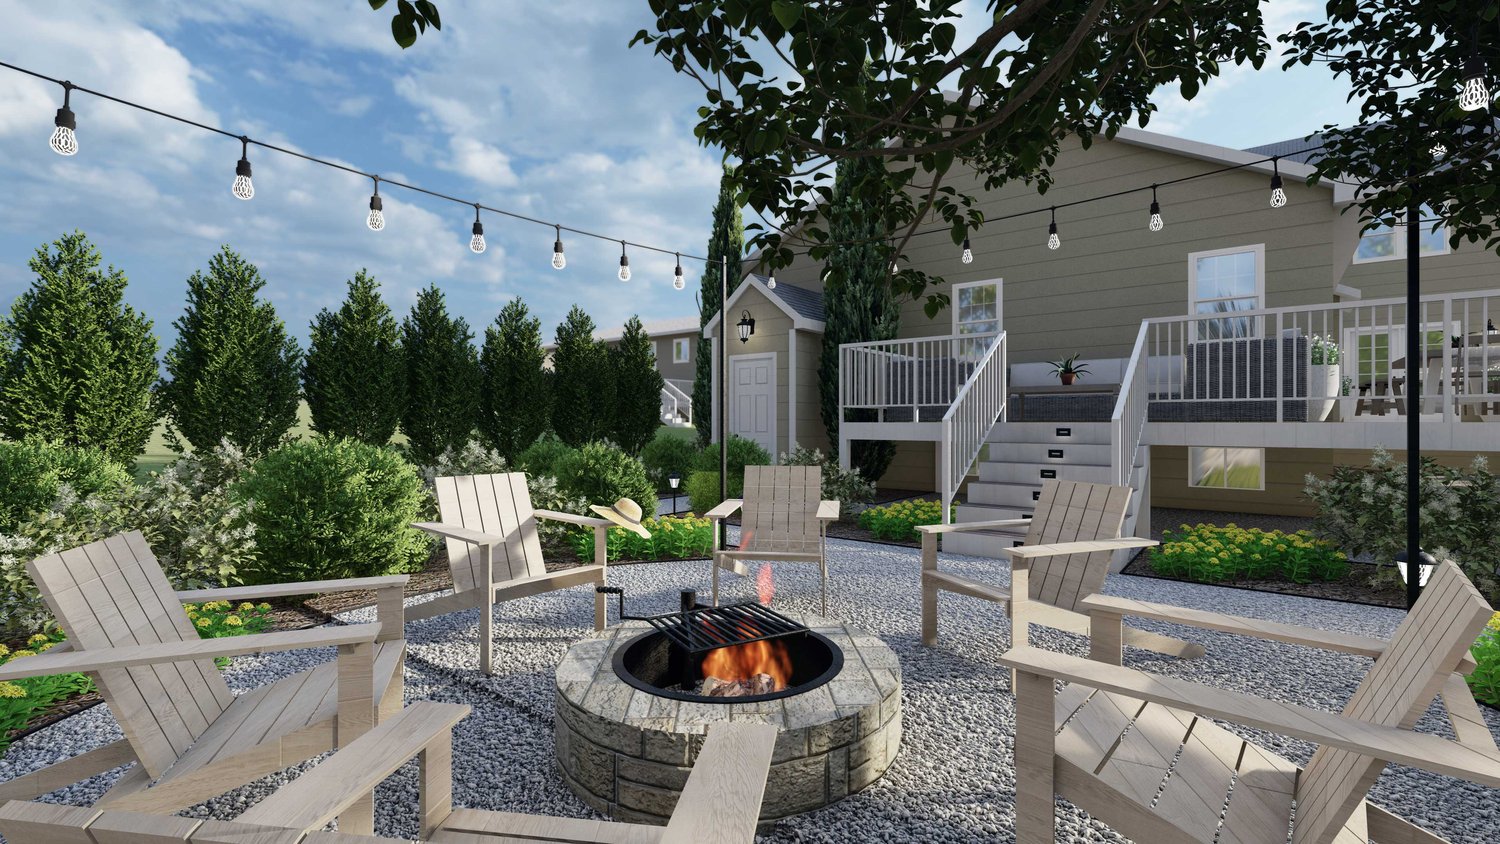 Cambridge backyard with graveled floors, sitting area and fire pit